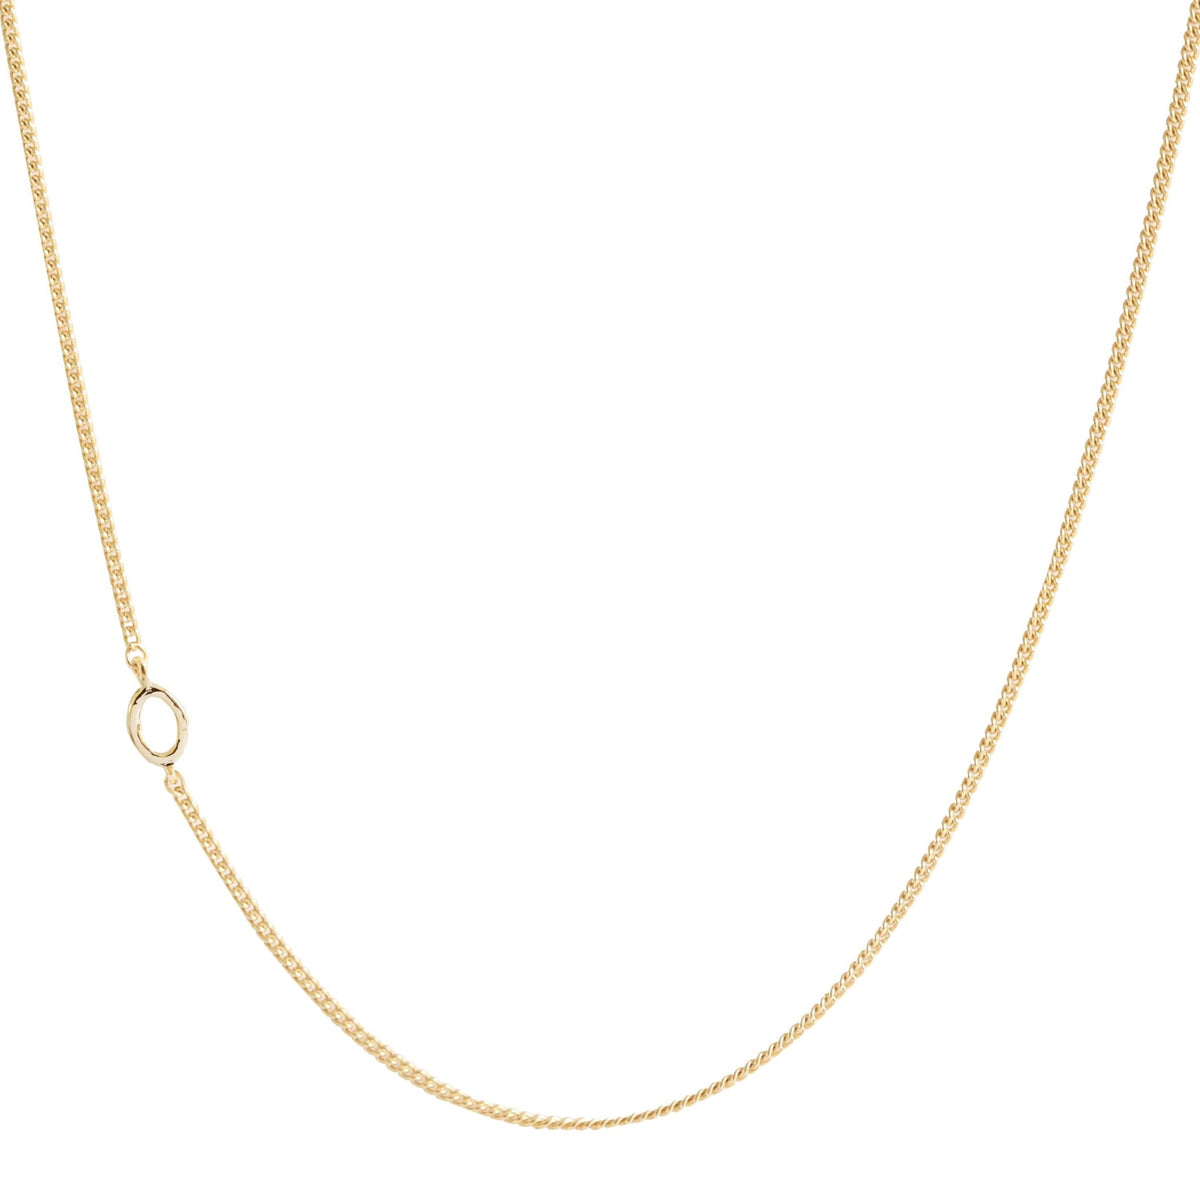 NOTABLE OFFSET INITIAL NECKLACE - O - GOLD - SO PRETTY CARA COTTER